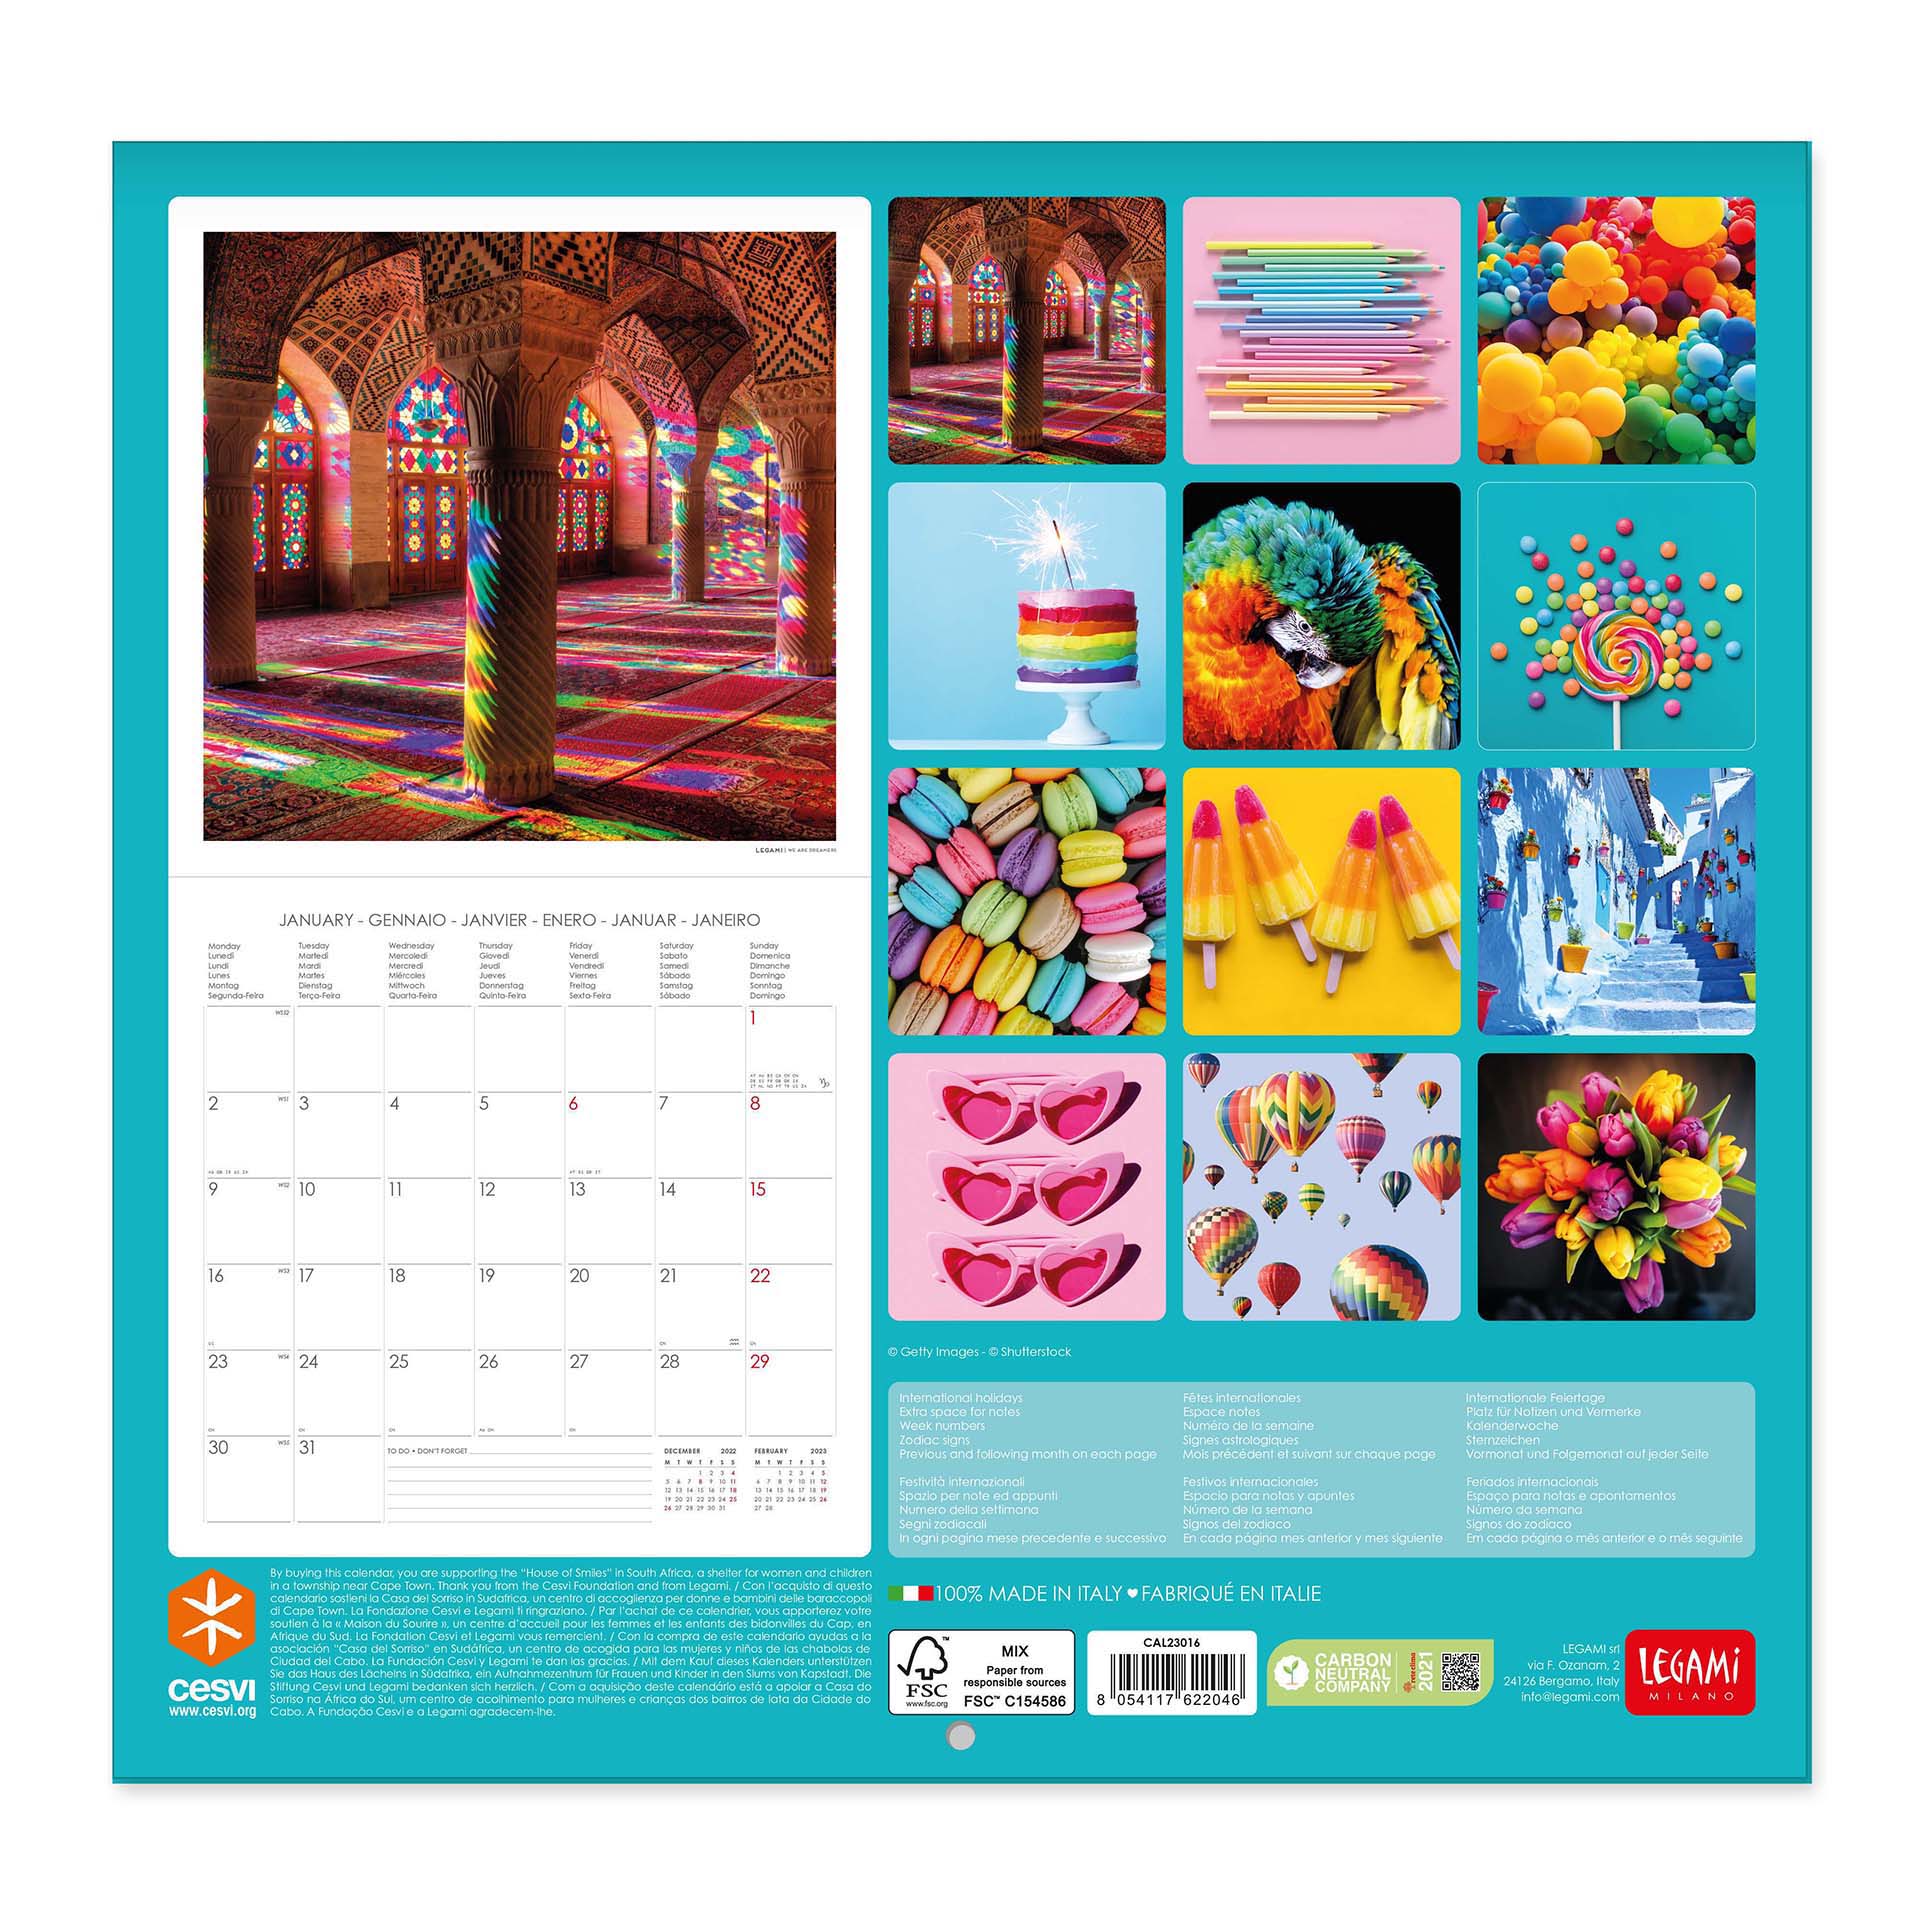 2023 Live Colorfully - Square Wall Calendar